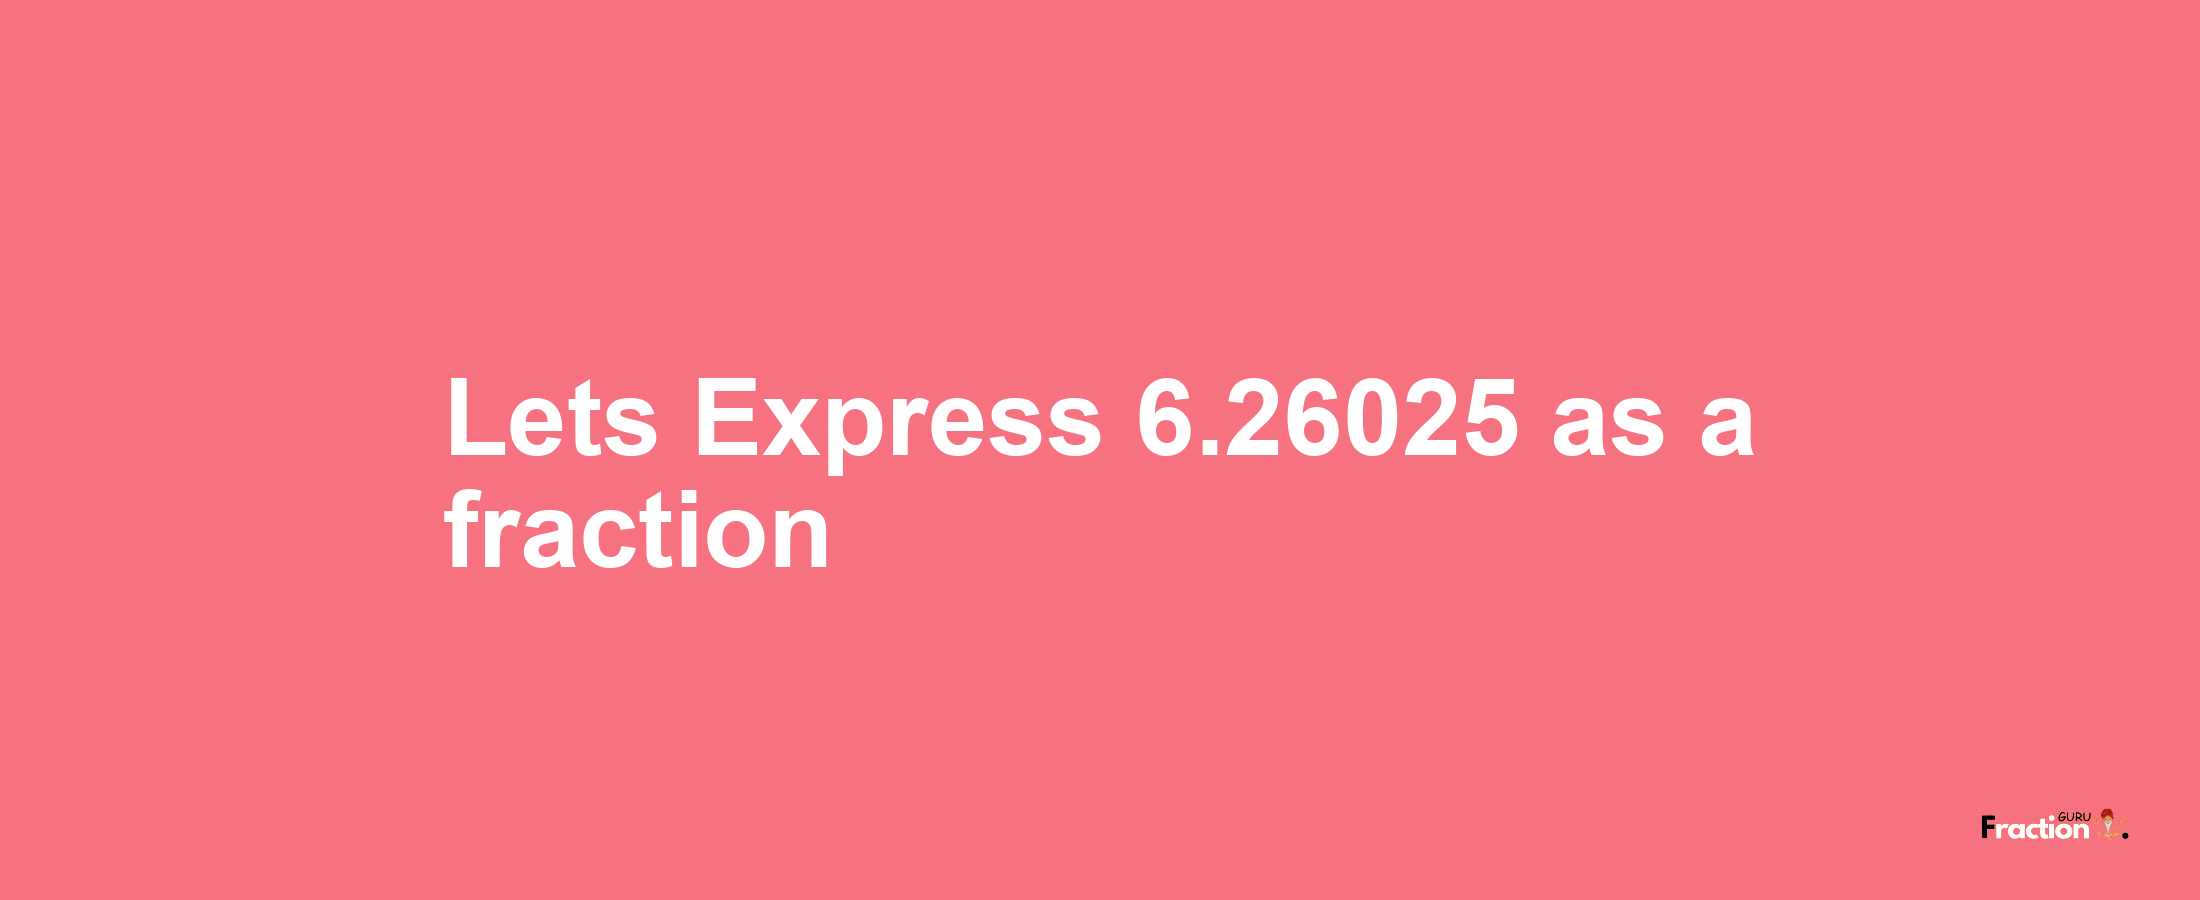 Lets Express 6.26025 as afraction